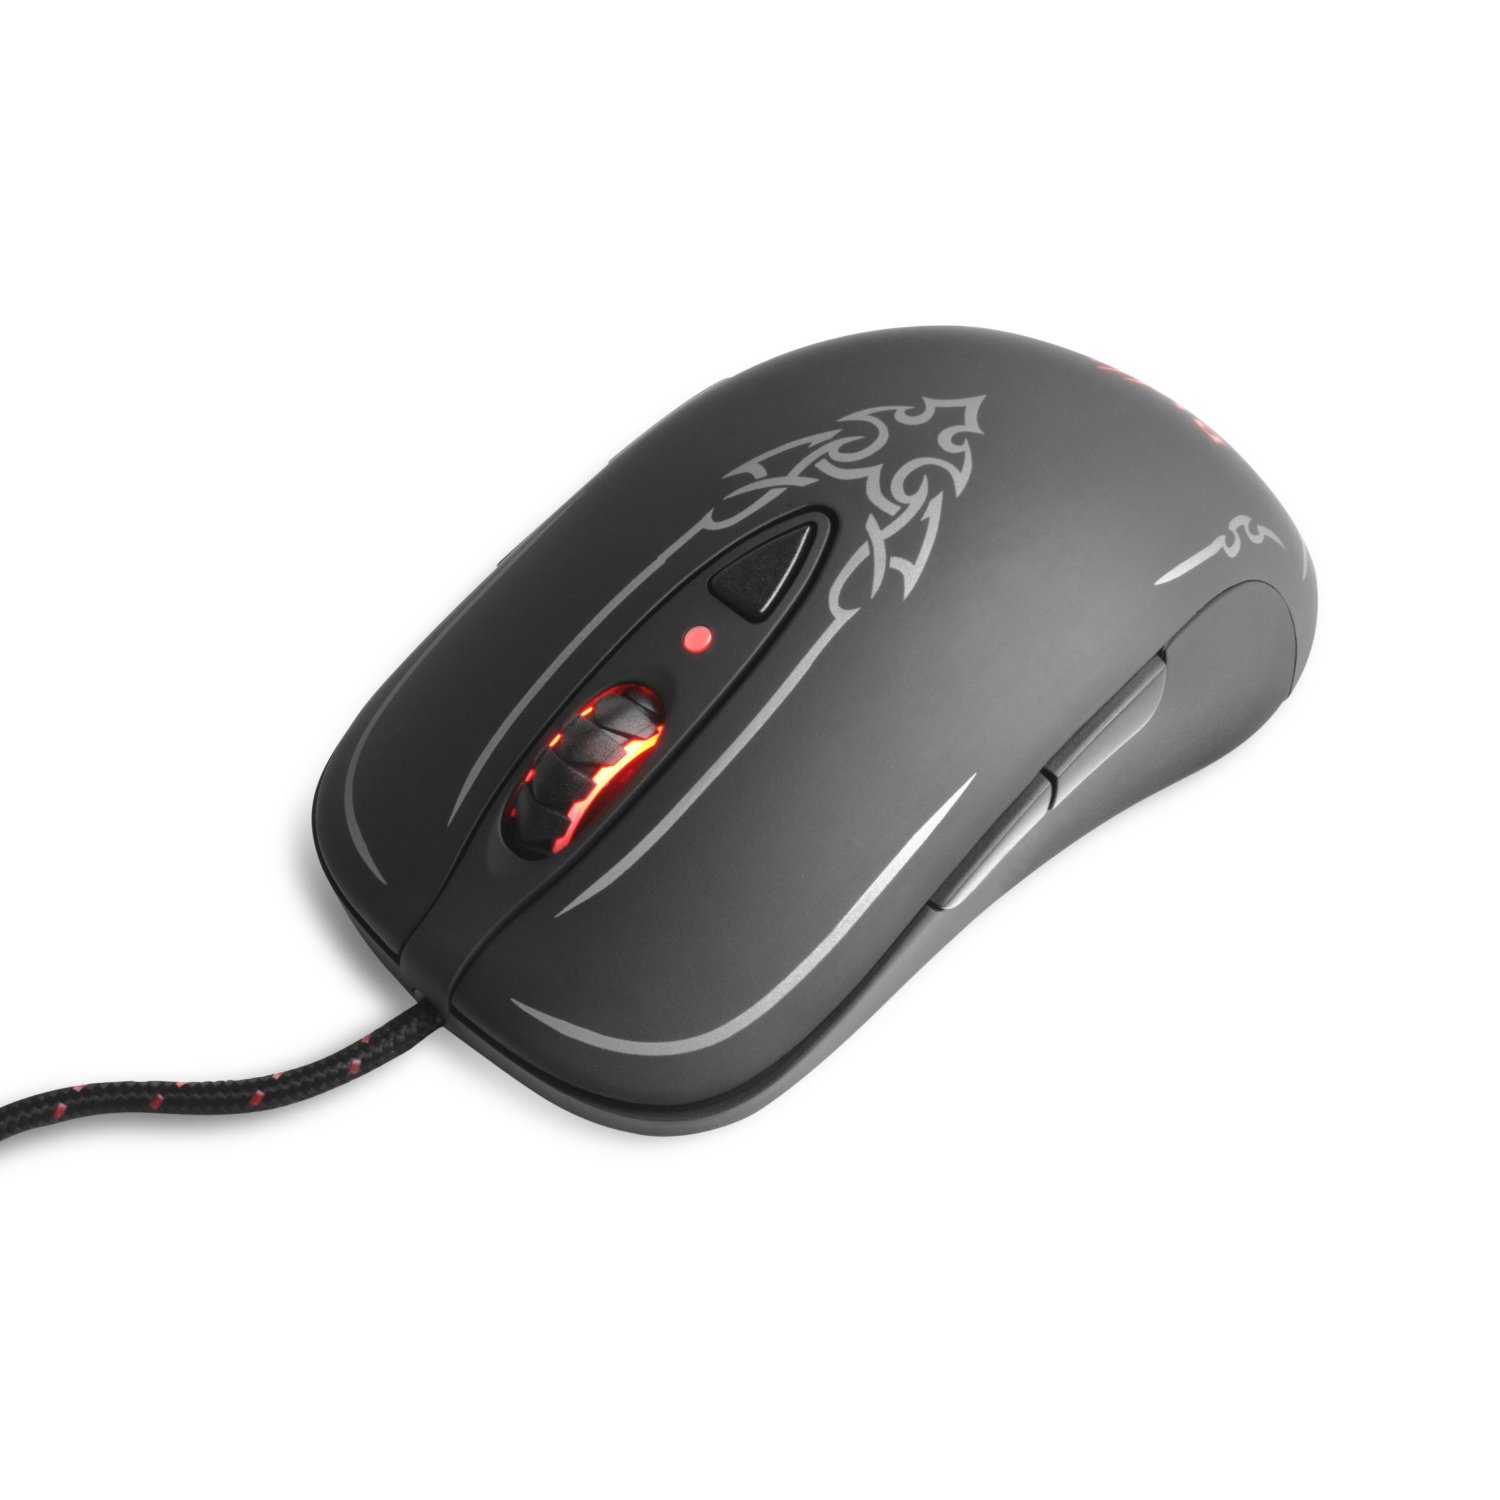 http://thetechjournal.com/wp-content/uploads/images/1202/1329590420-steelseries-diablo-iii-gaming-mouse-1.jpg